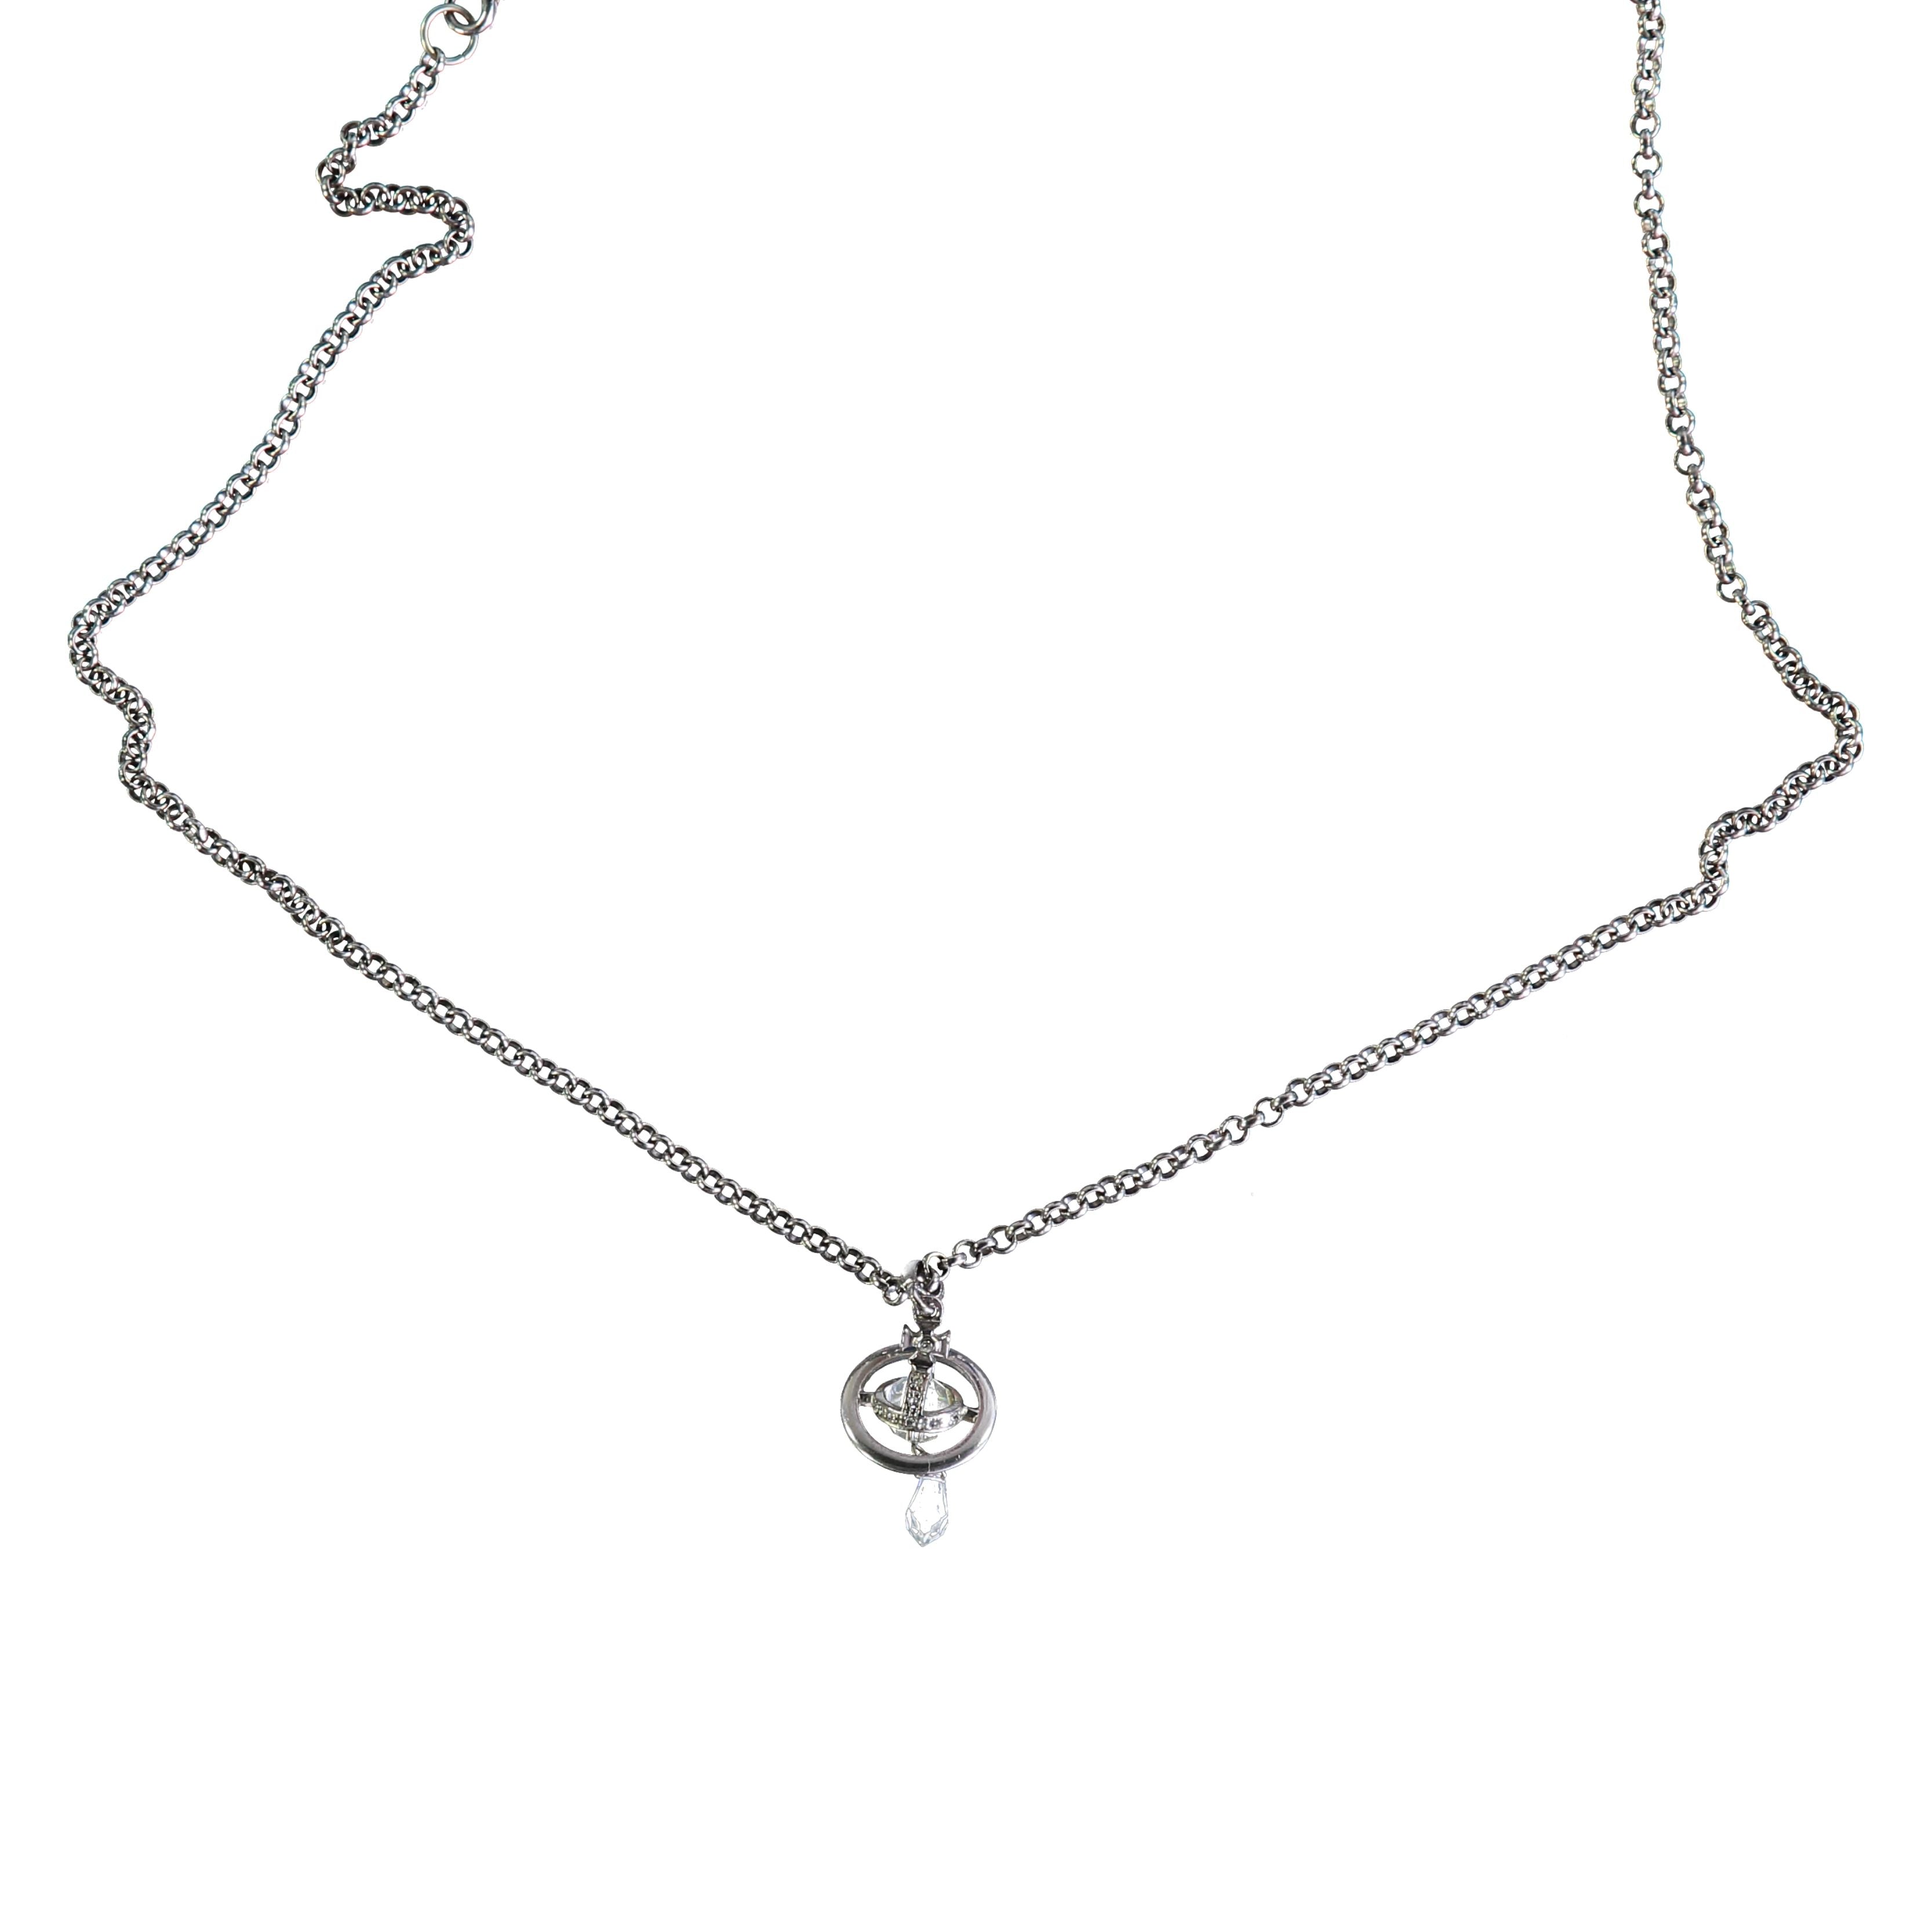 Vivienne Westwood Classic Crystal Orb Chain Pendant Necklace